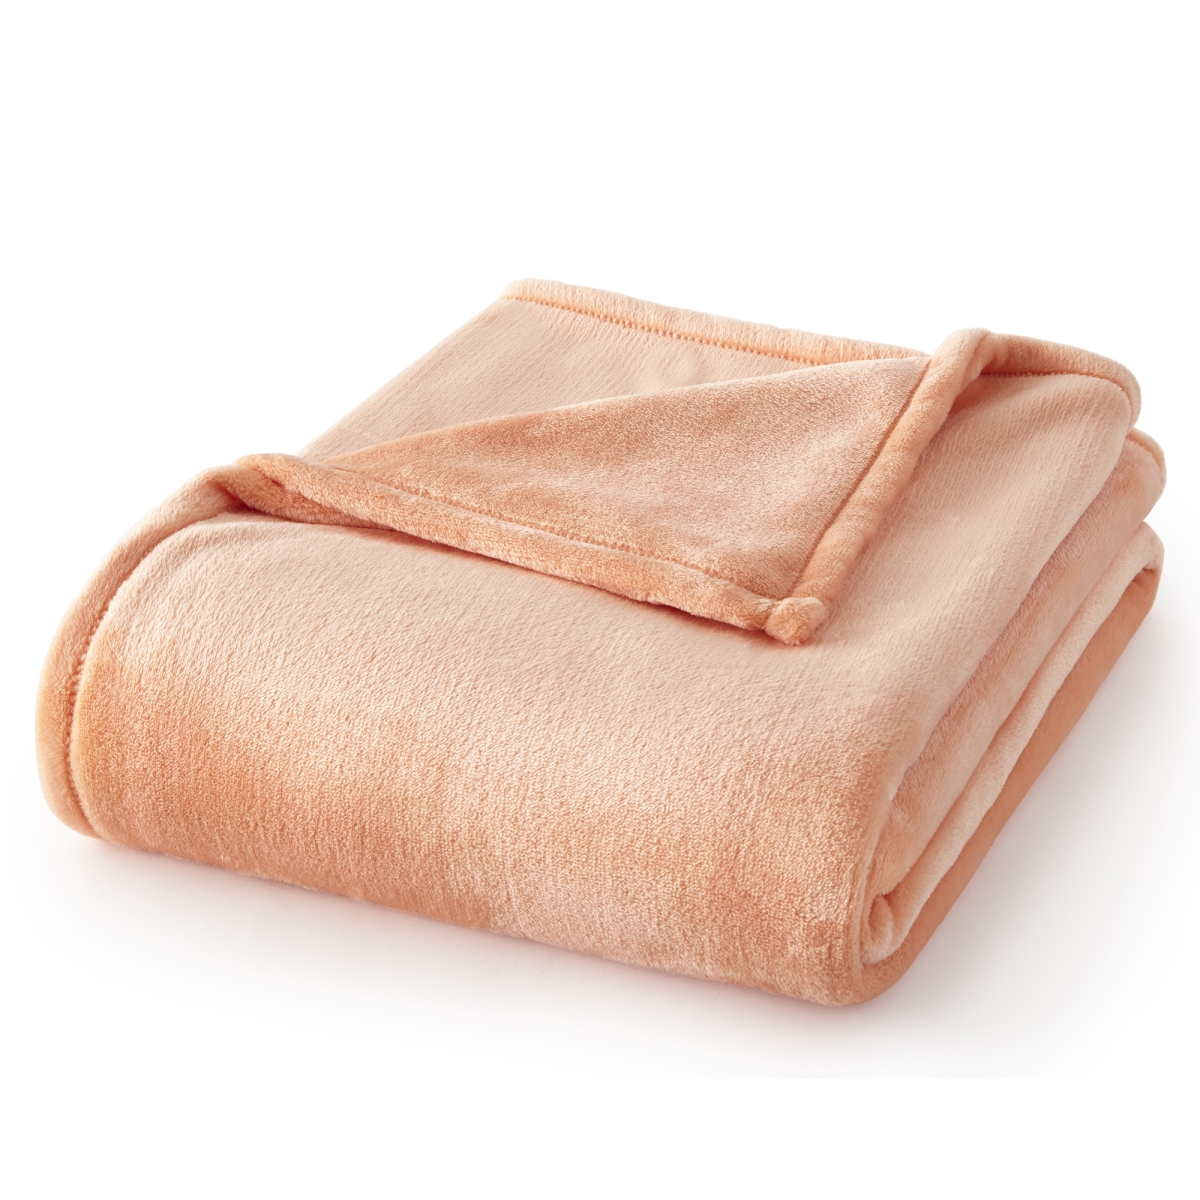 T1111068-mm-corl 60 X 70 In. Solid Color Velvet Plush Throw, Coral